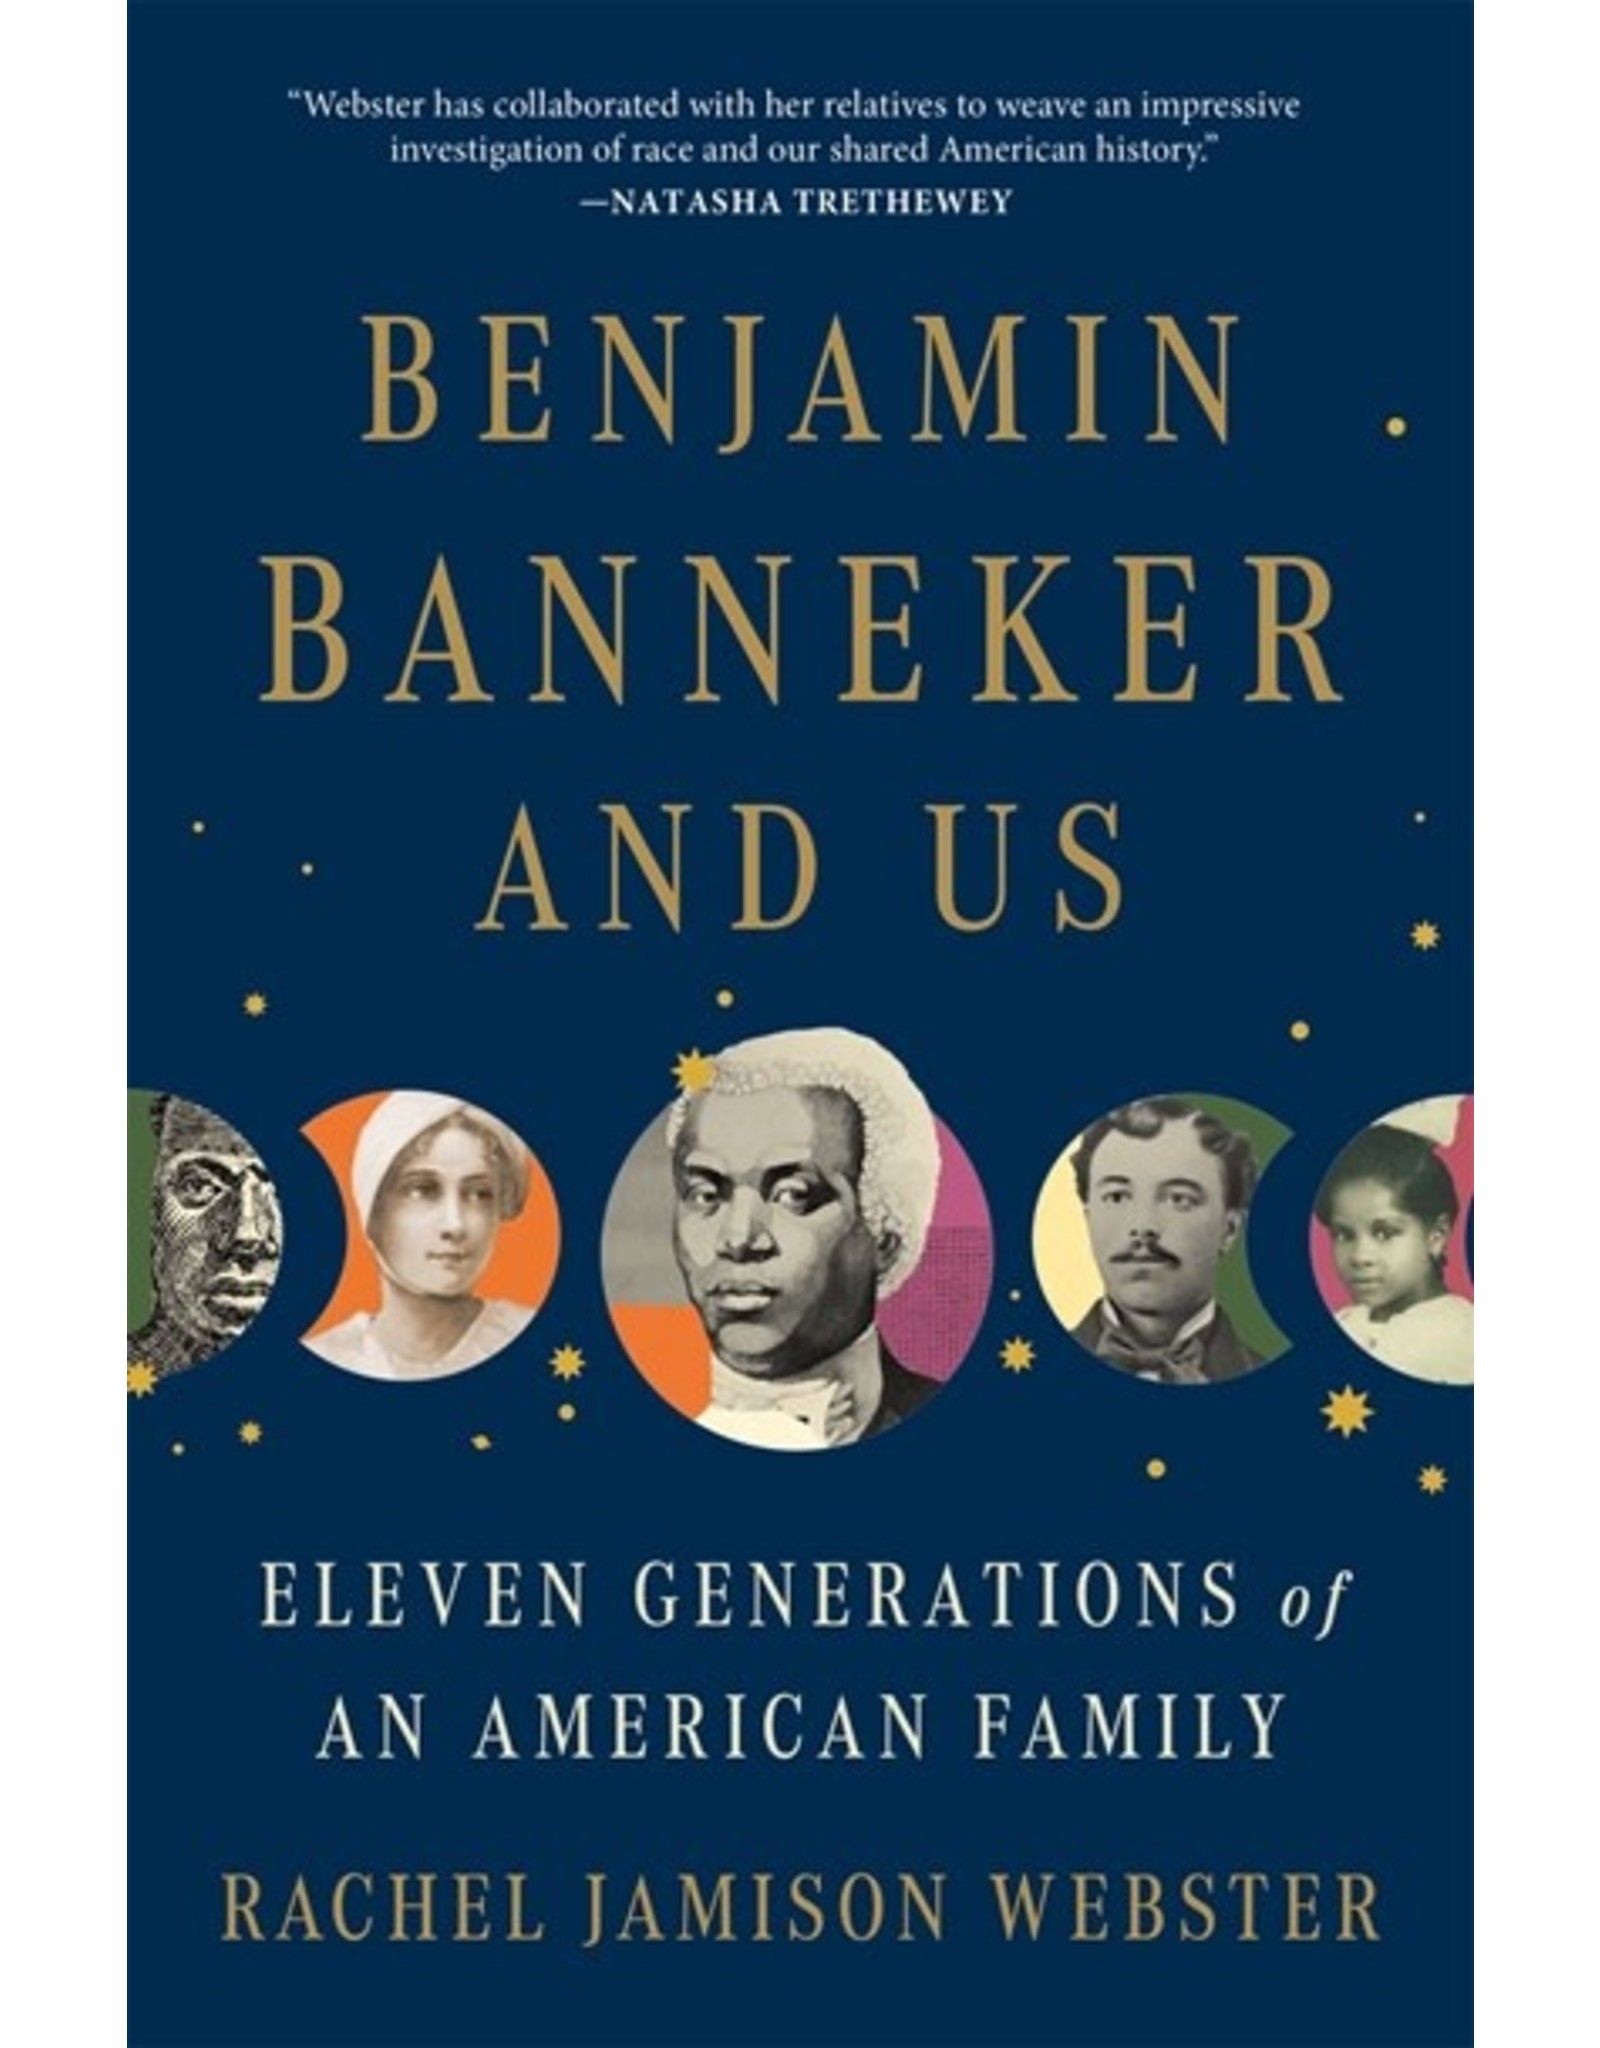 Books Benjamin Banneker and Us: Eleven Generations of an American Family  by Rachel Jamison Webster